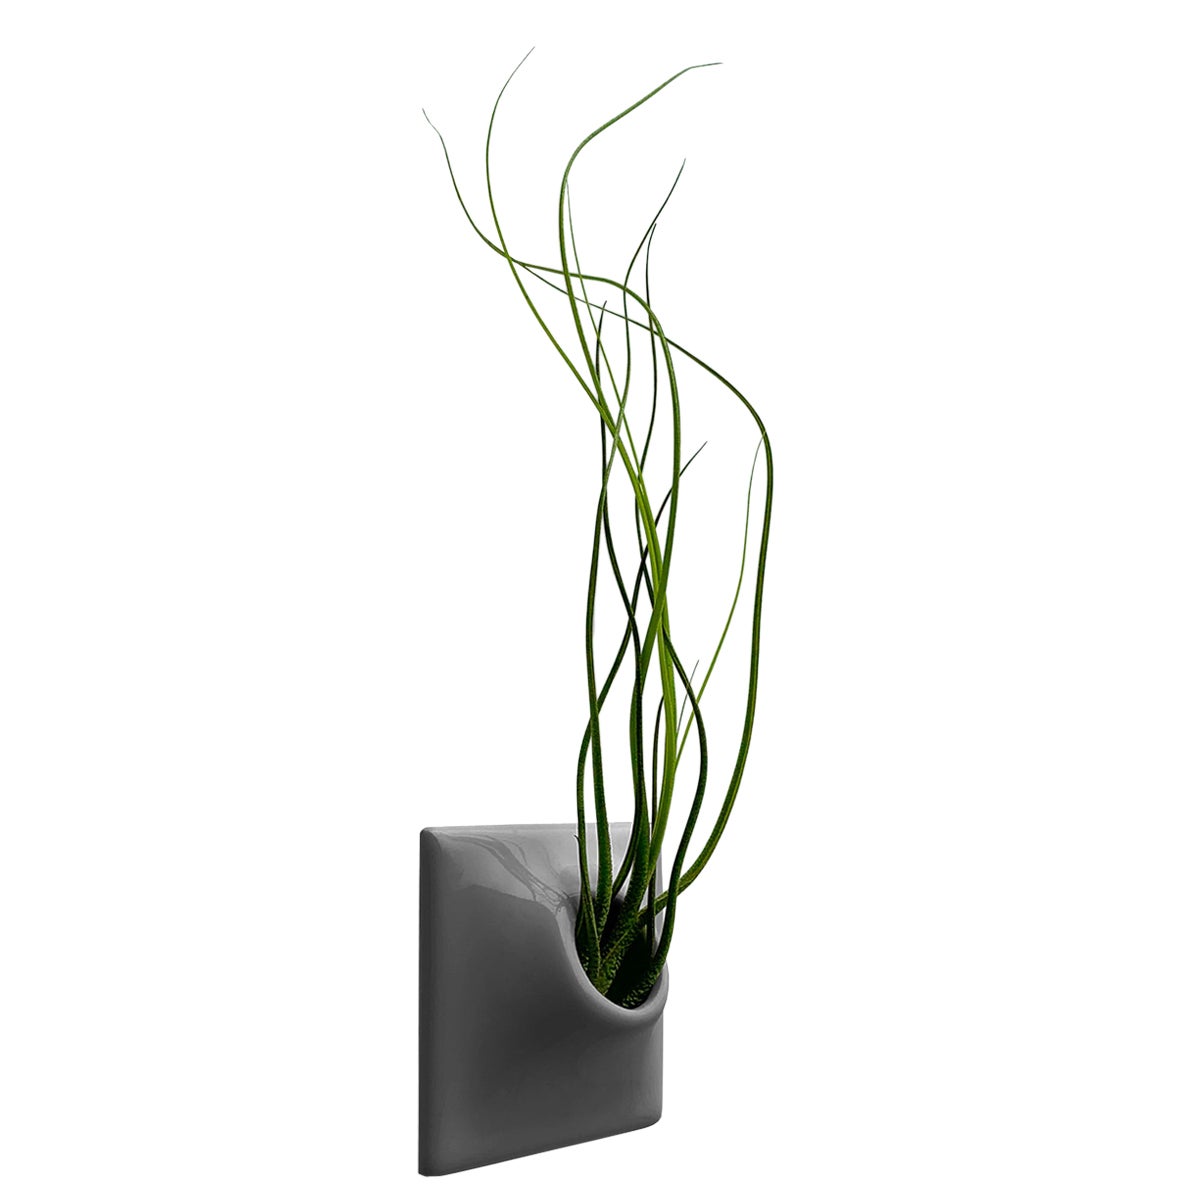 Modern Gray Wall Planter, Air Plant Holder, Living Wall Decor, Node 3" X Small D For Sale